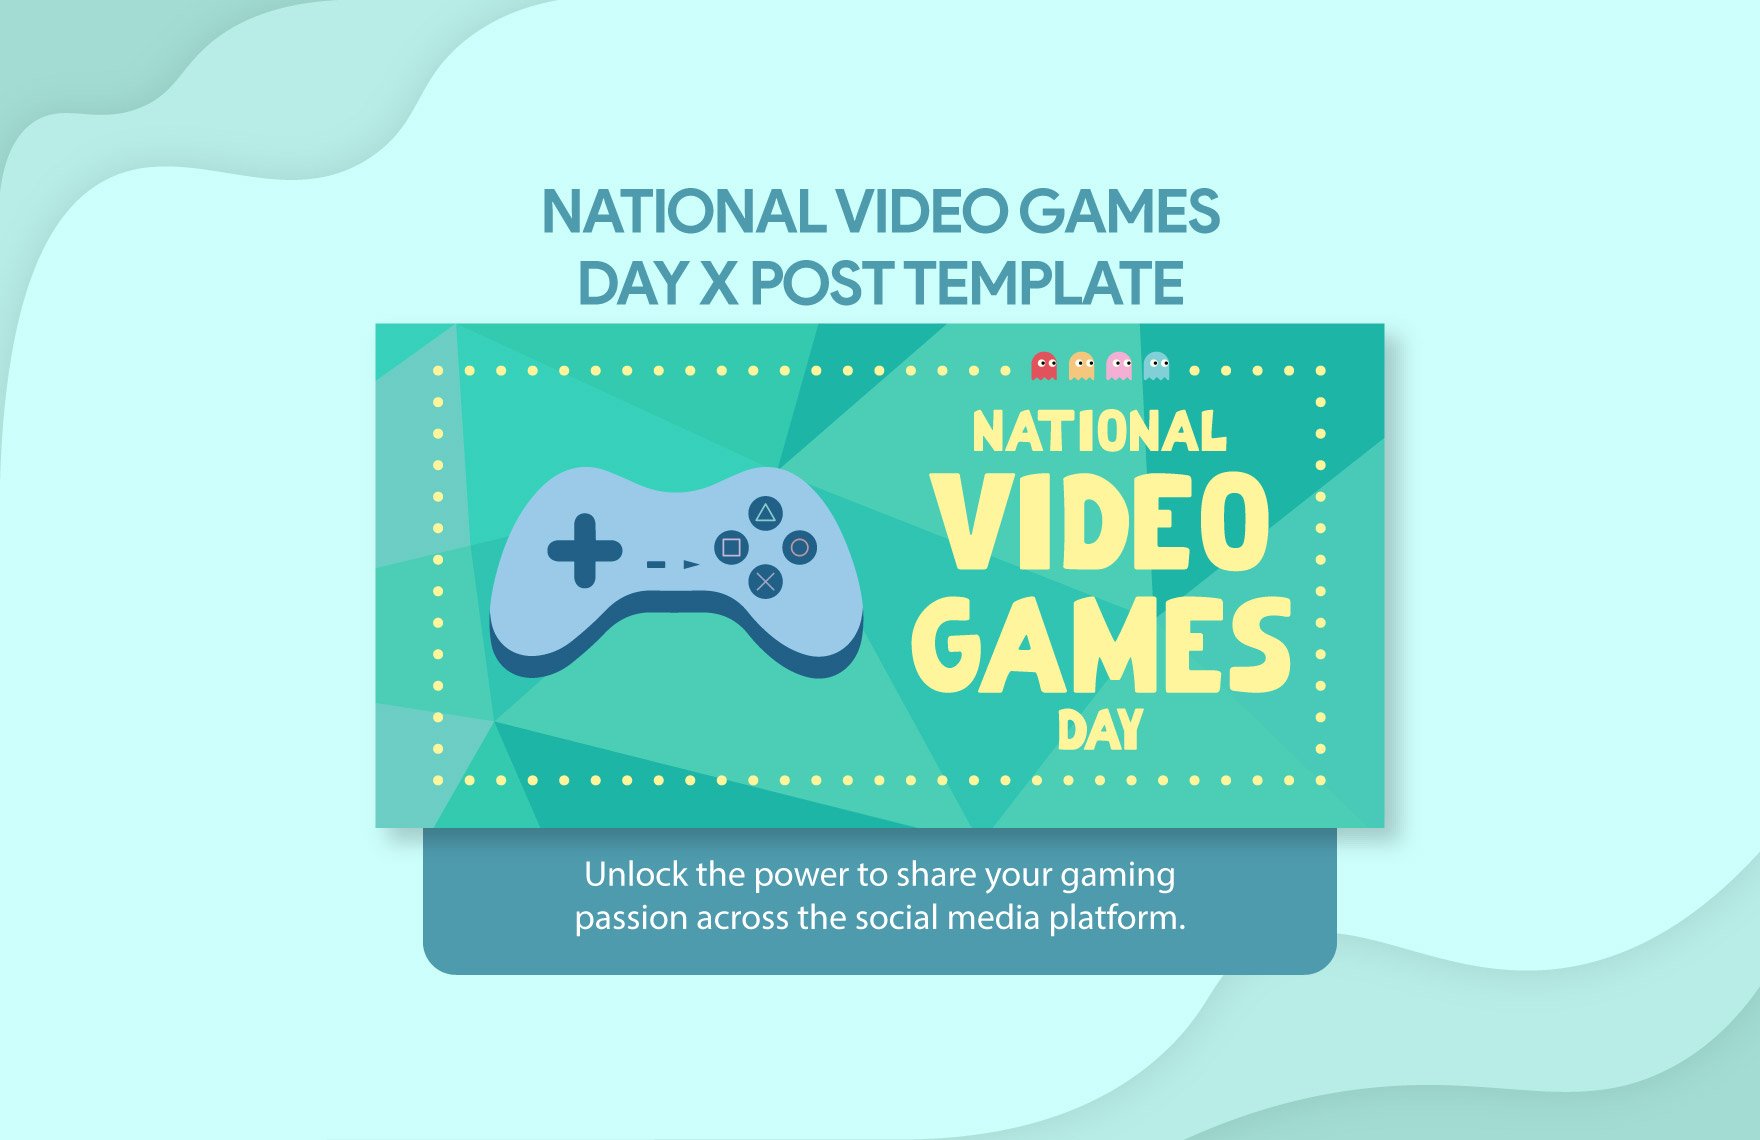 Free National Video Games Day X Post Template in Illustrator, PSD, PNG